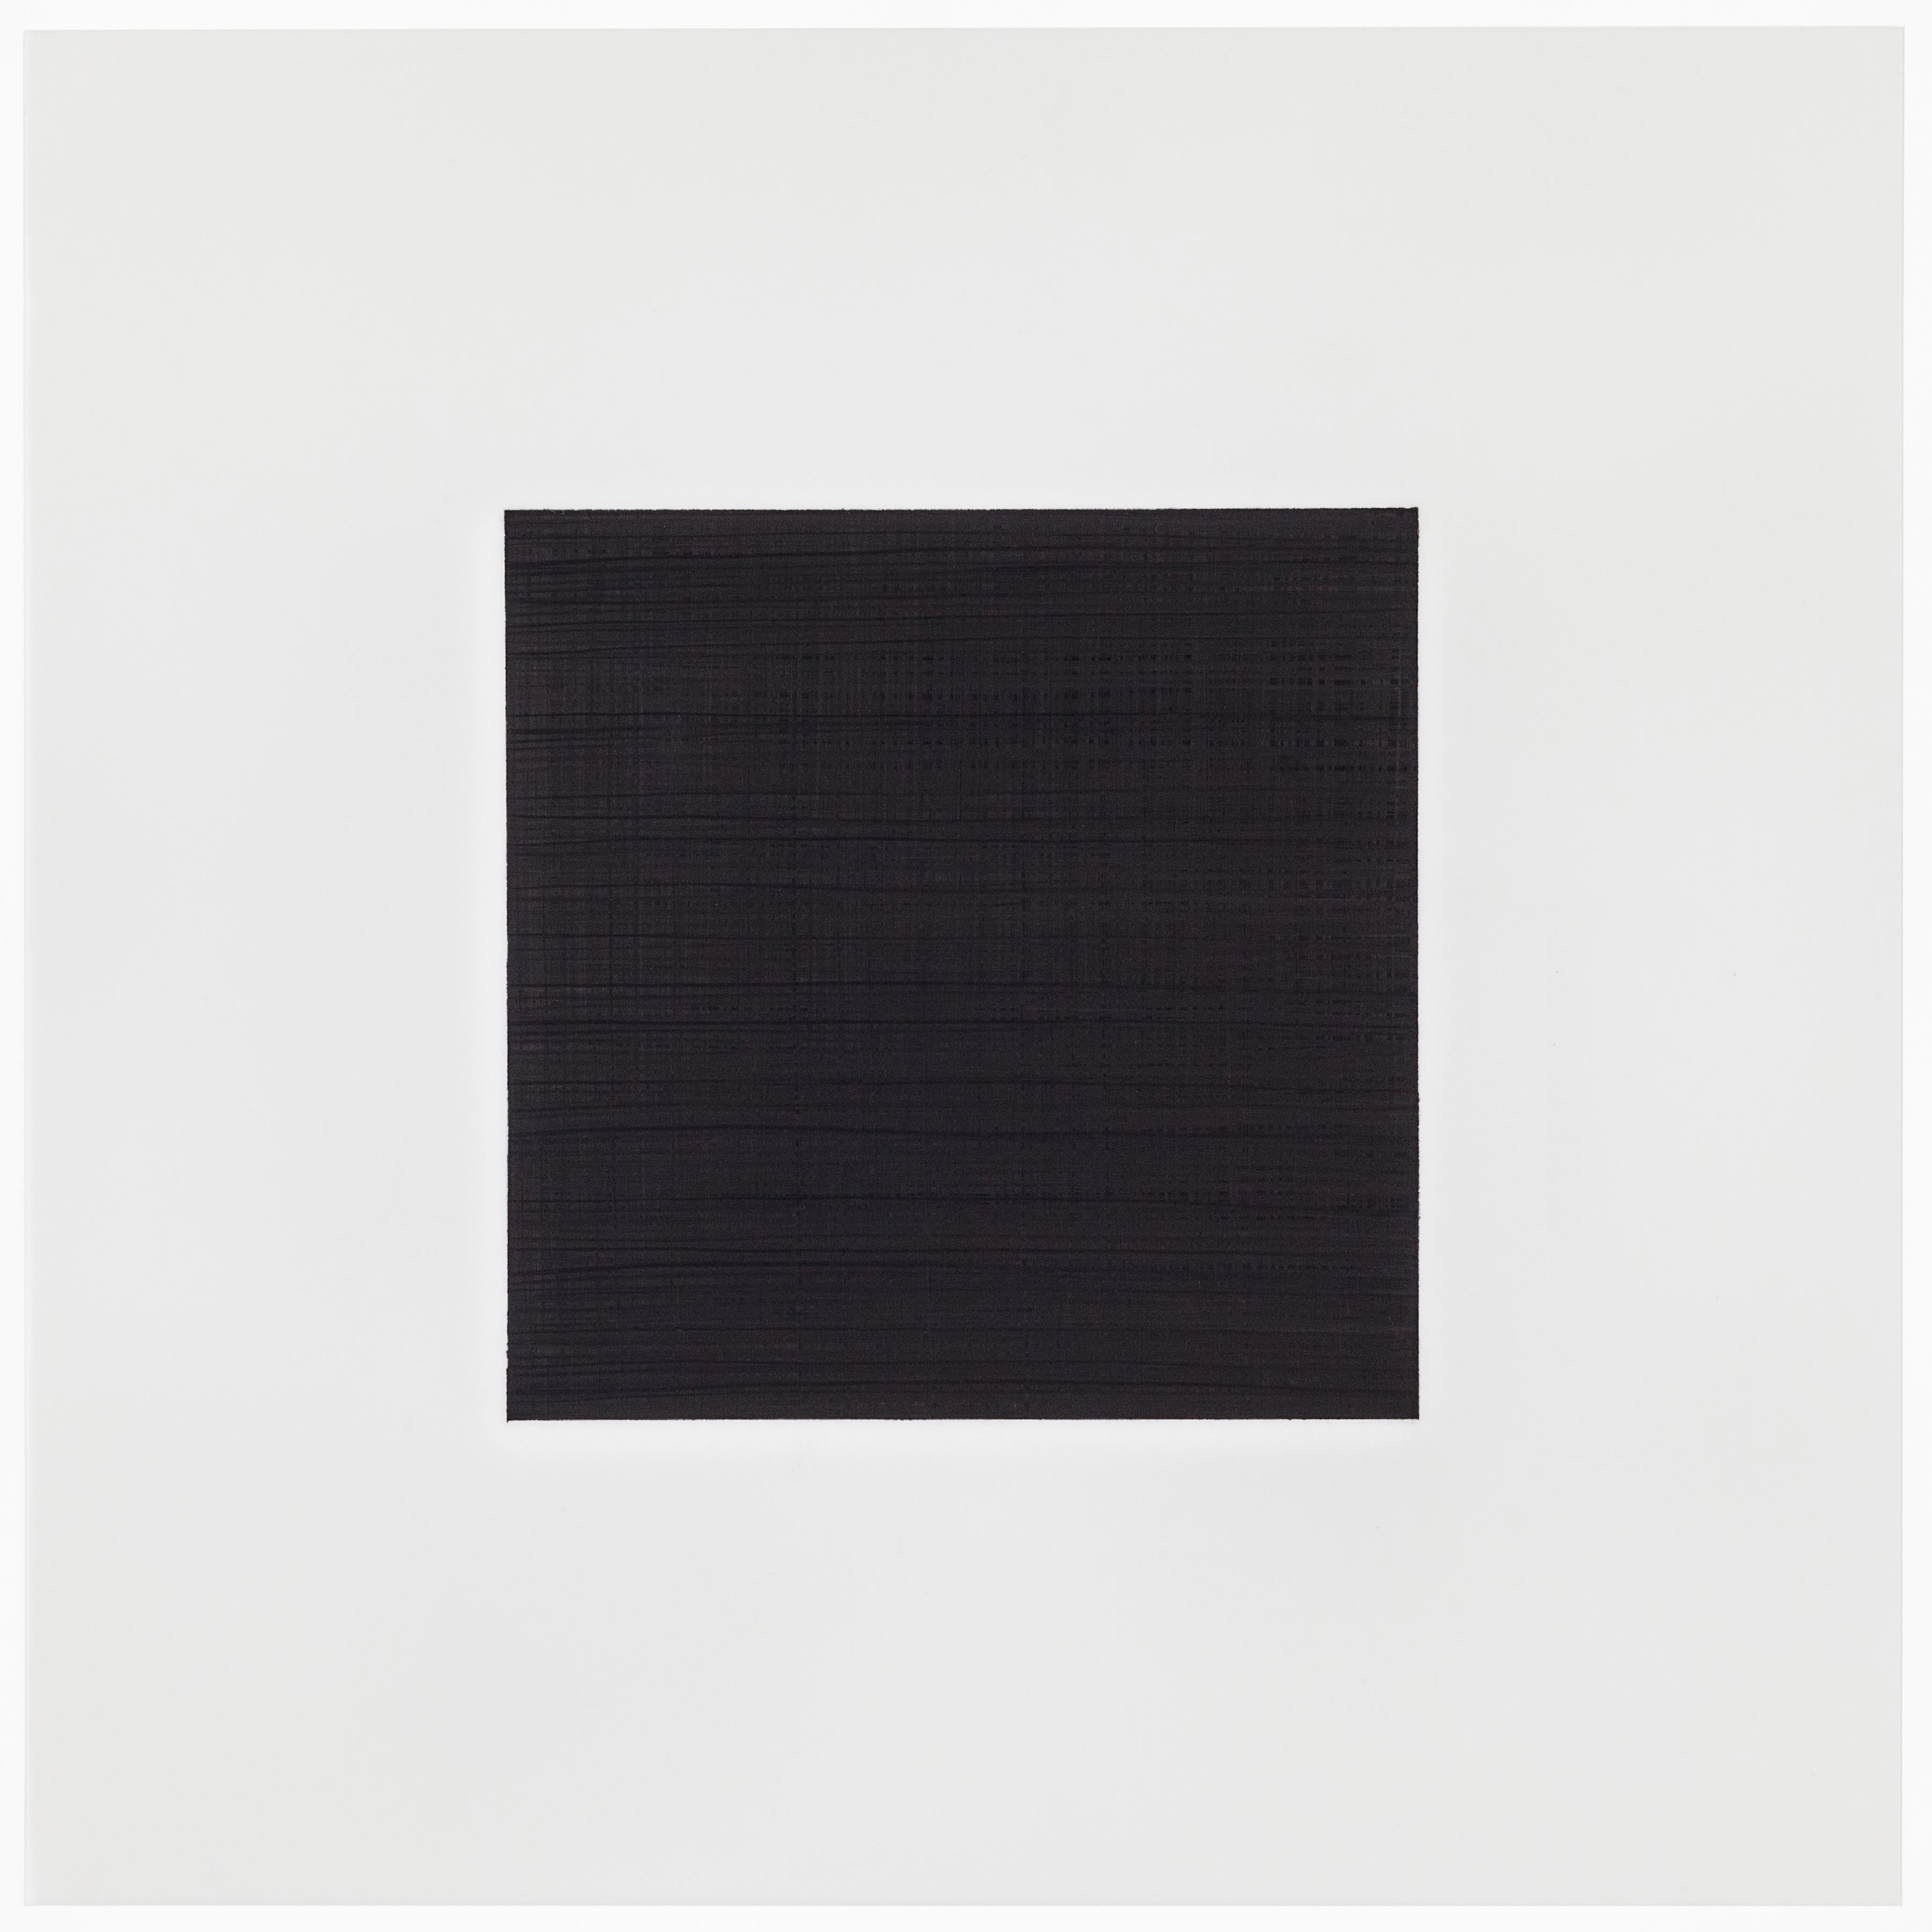 Patrick Carrara Black Ink on Mylar Drawings, Appearance Series, 2013 - 2015 For Sale 1